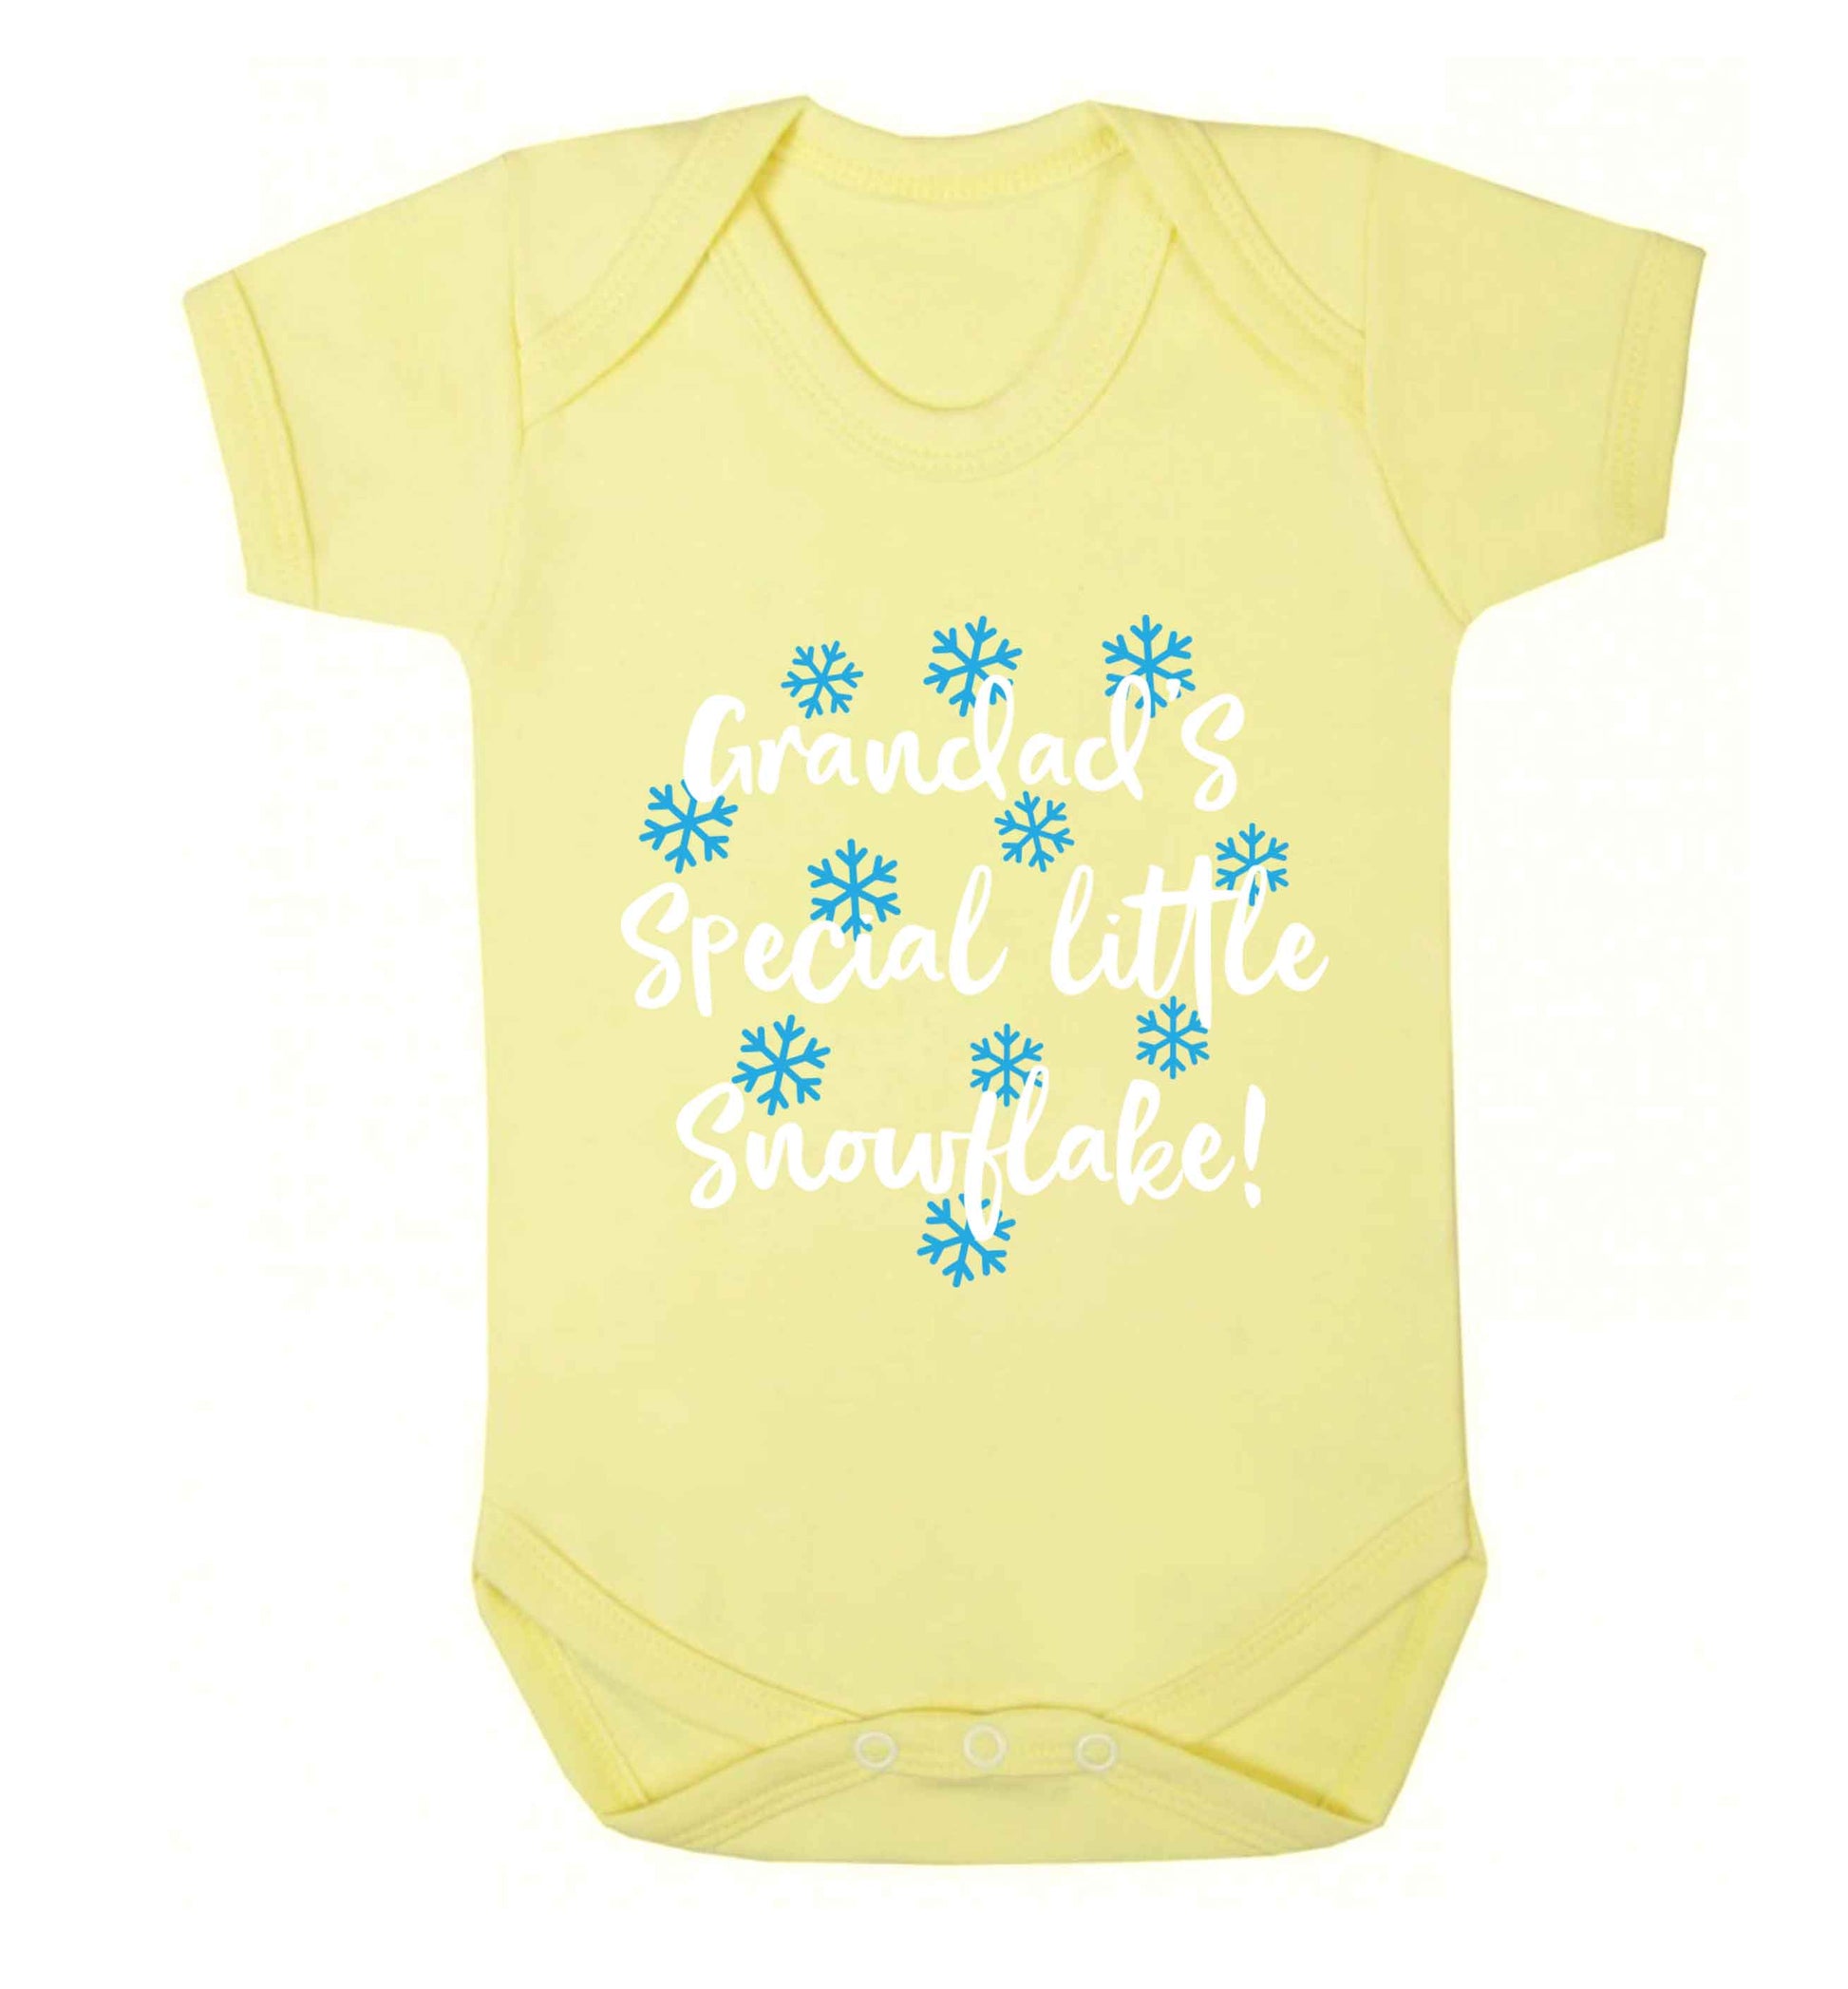 Grandad's special little snowflake Baby Vest pale yellow 18-24 months